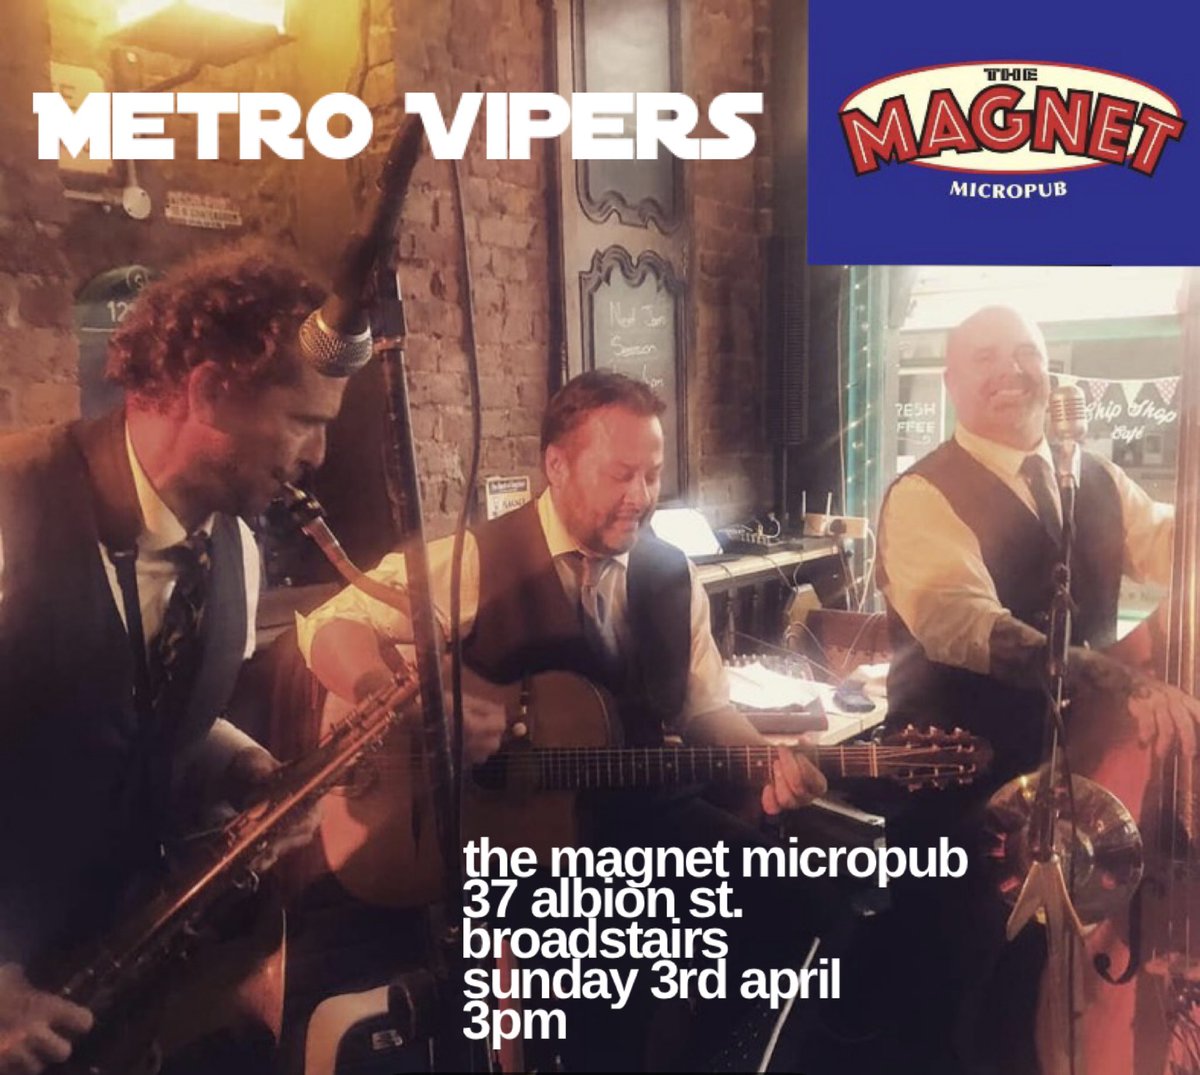 This coming Sunday 3rd April at 3pm you can hear us show no mercy to old songs when we play at @Themagnetmicro1 in #broadstairs #kent come on down for fine beers, atmosphere & swing jazz! #livemusic #isleofthanet #swingjazz